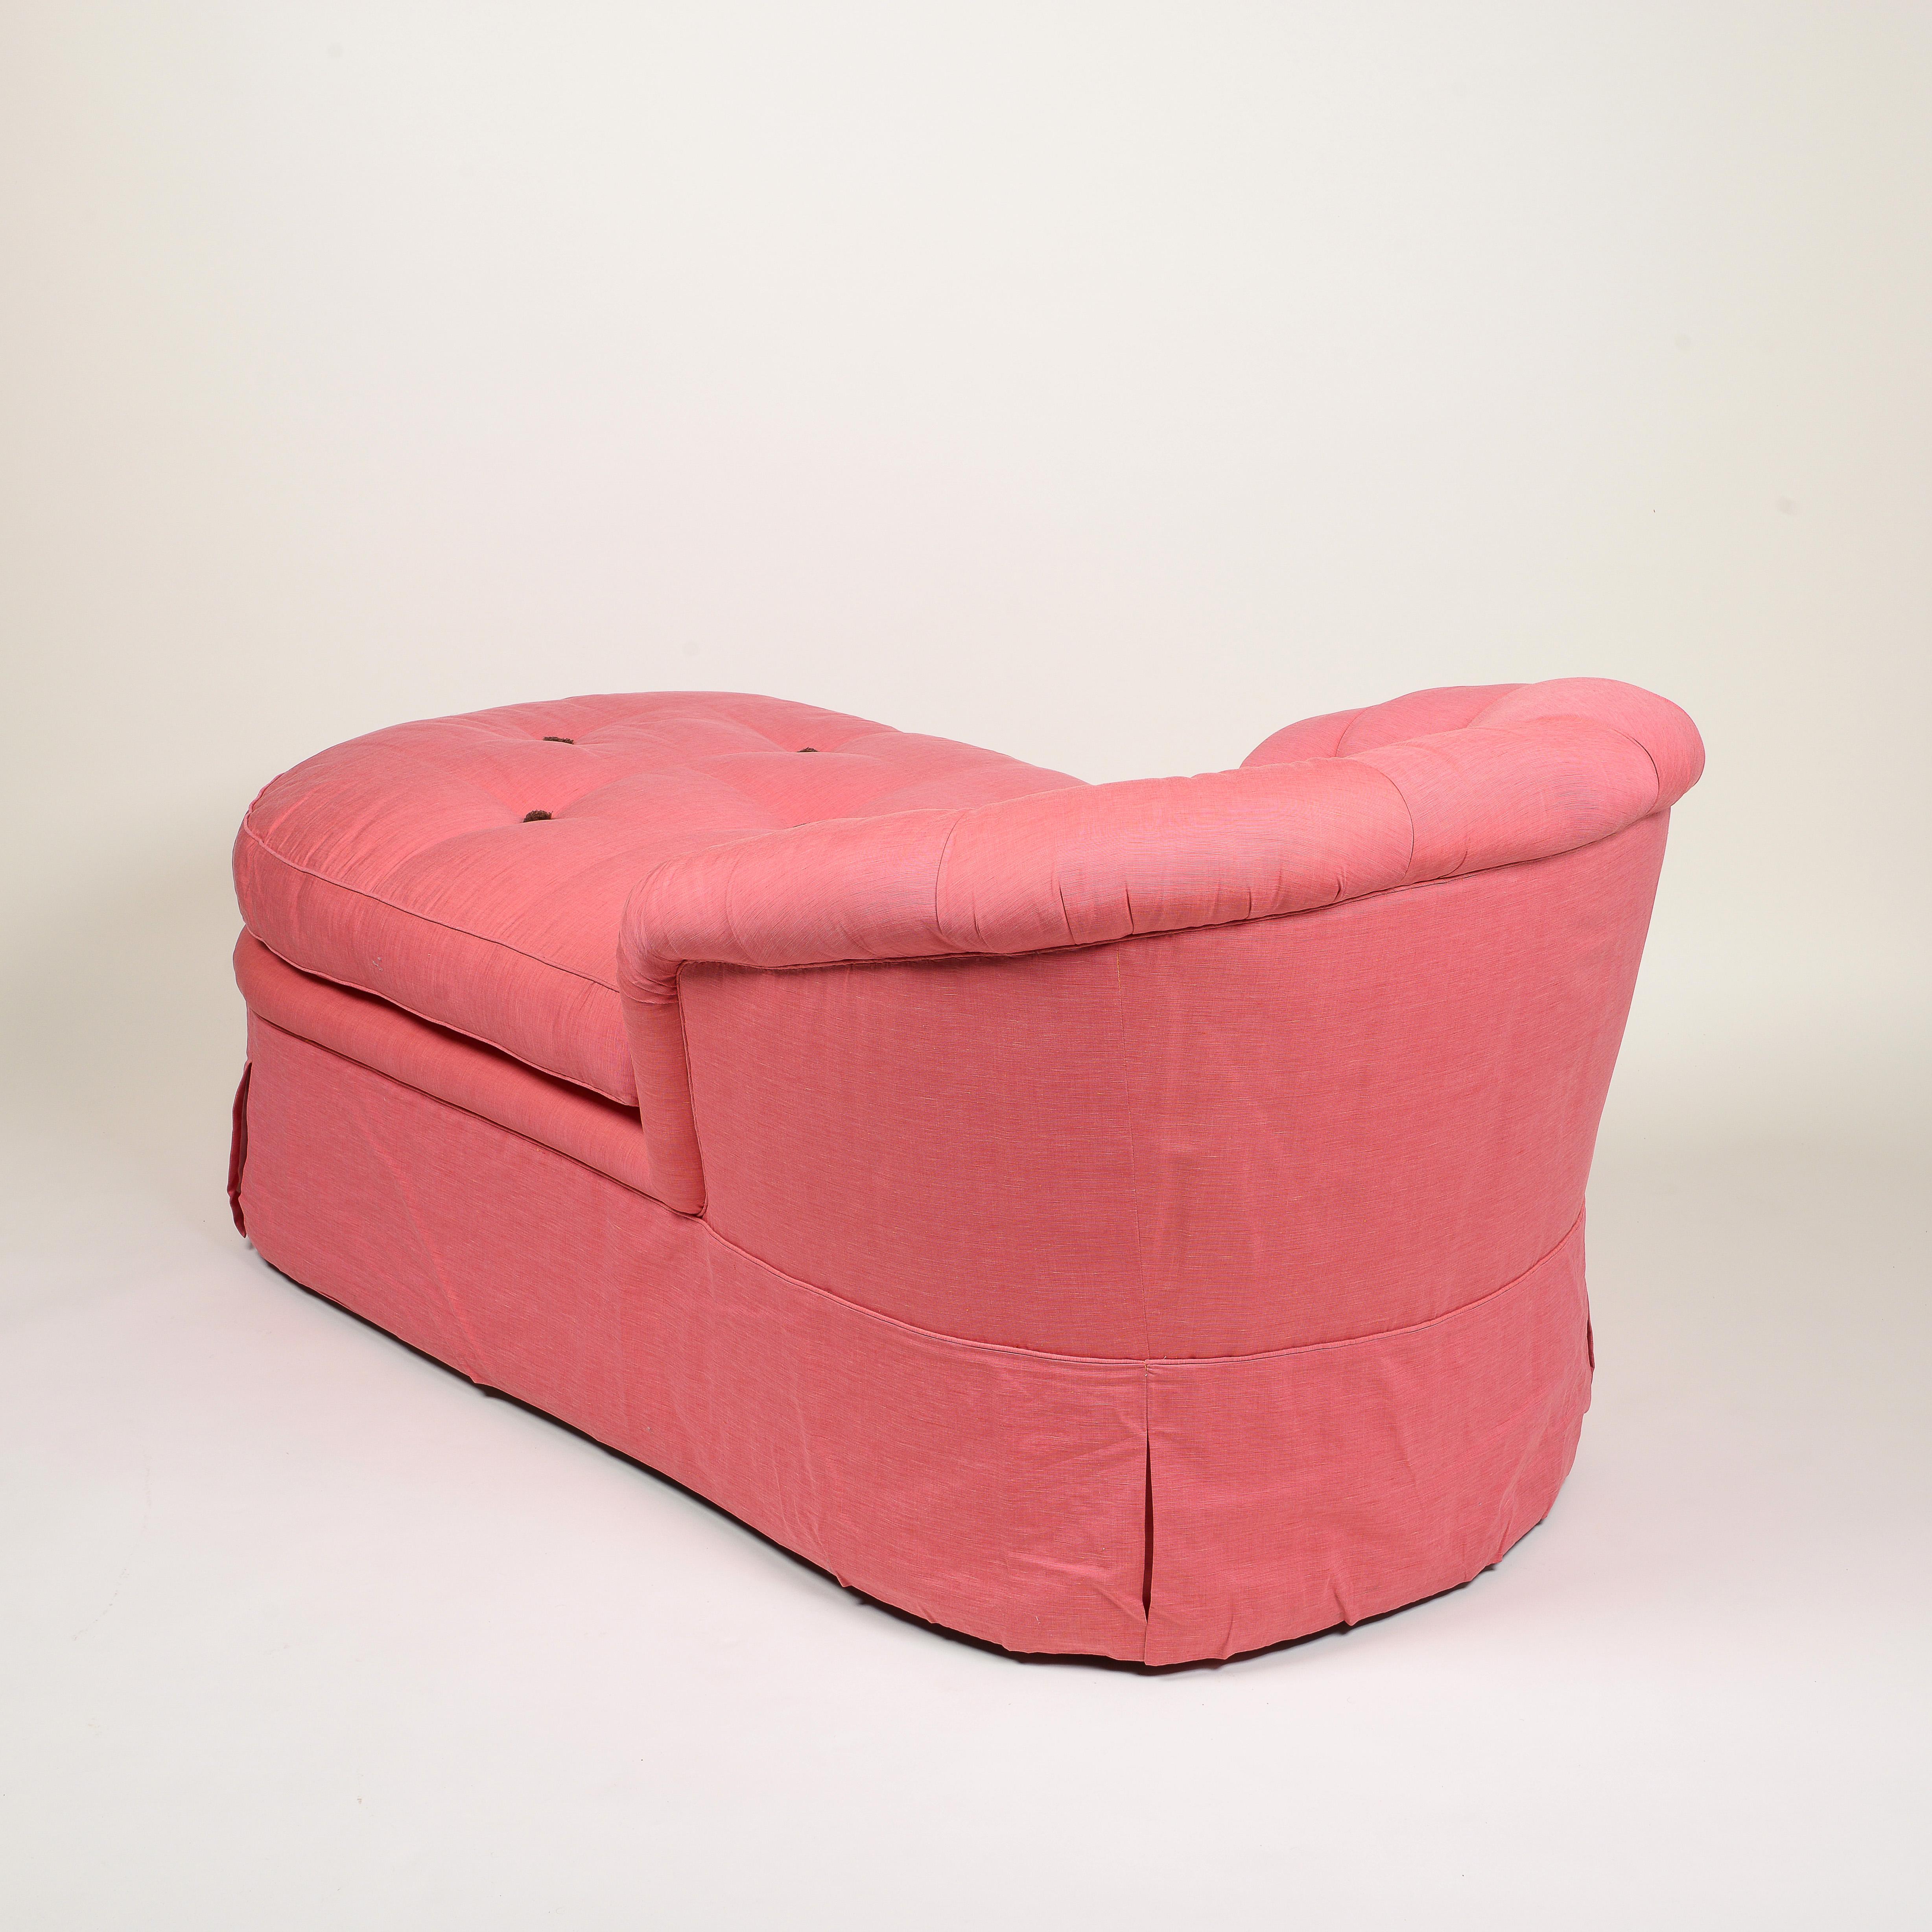 American Raspberry Cotton-Upholstered Tufted Chaise Longue